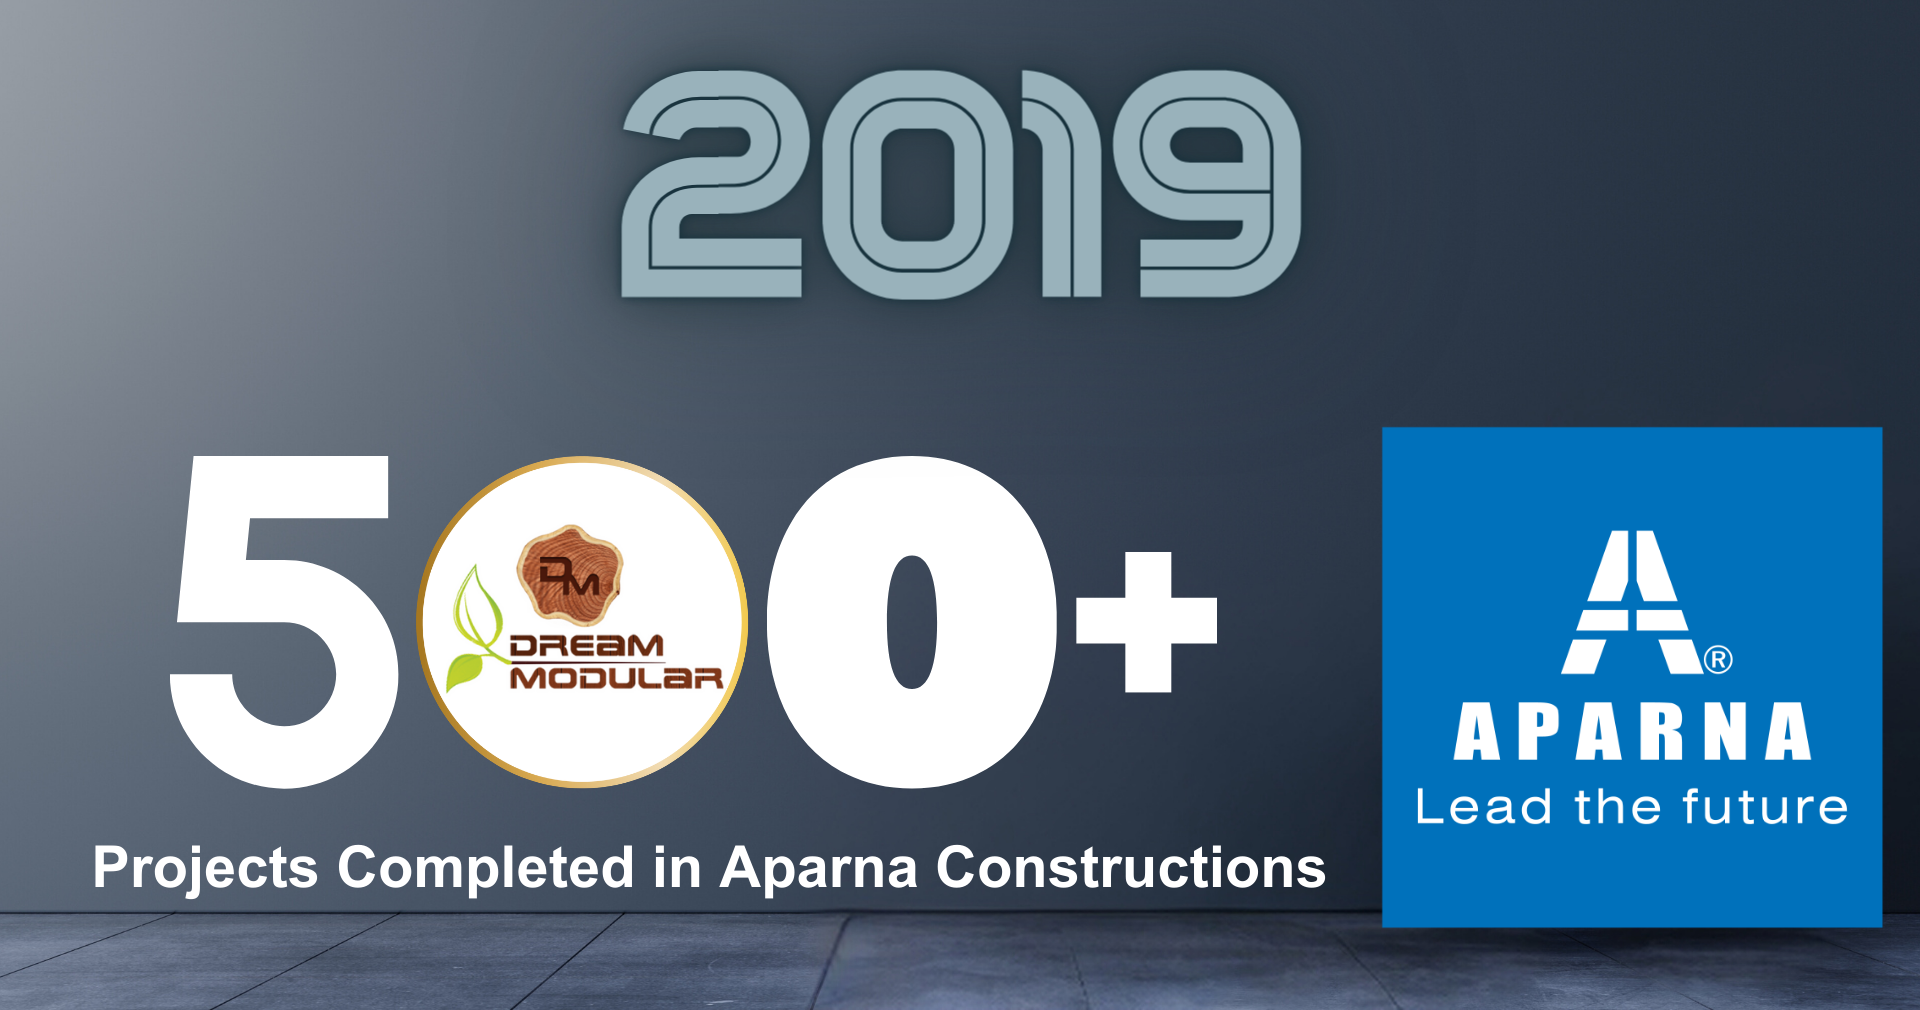 Achieved the milestone of 500+ completed projects in Aparna construction group itself. - 2019